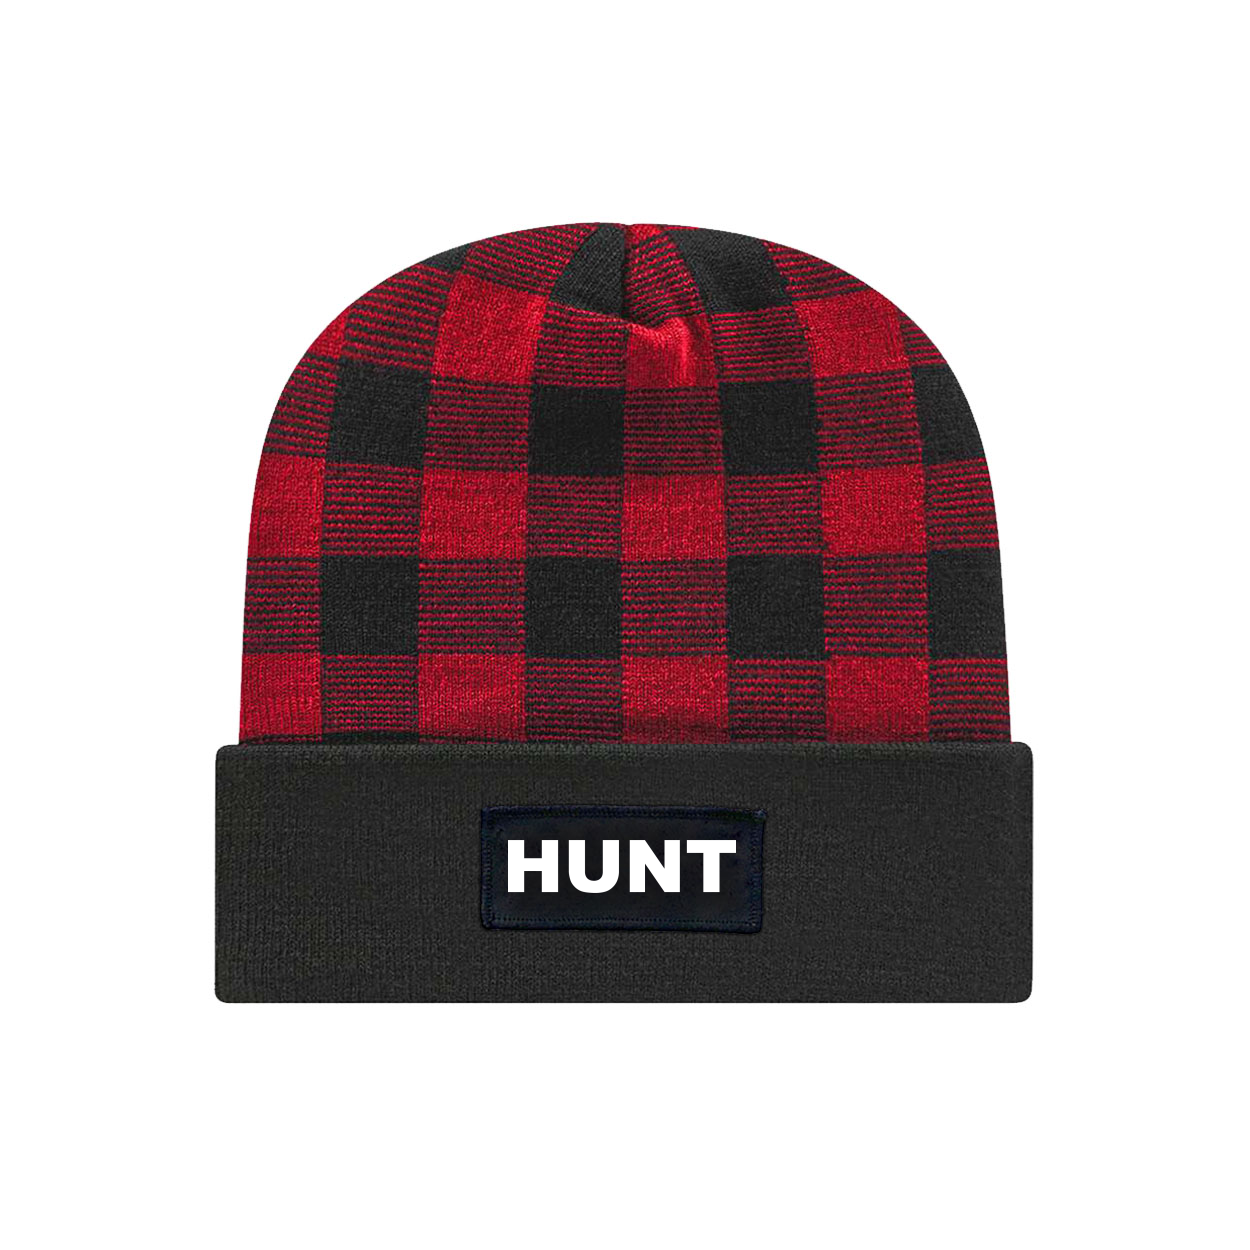 Hunt Brand Logo Night Out Woven Patch Roll Up Plaid Beanie Black/True Red